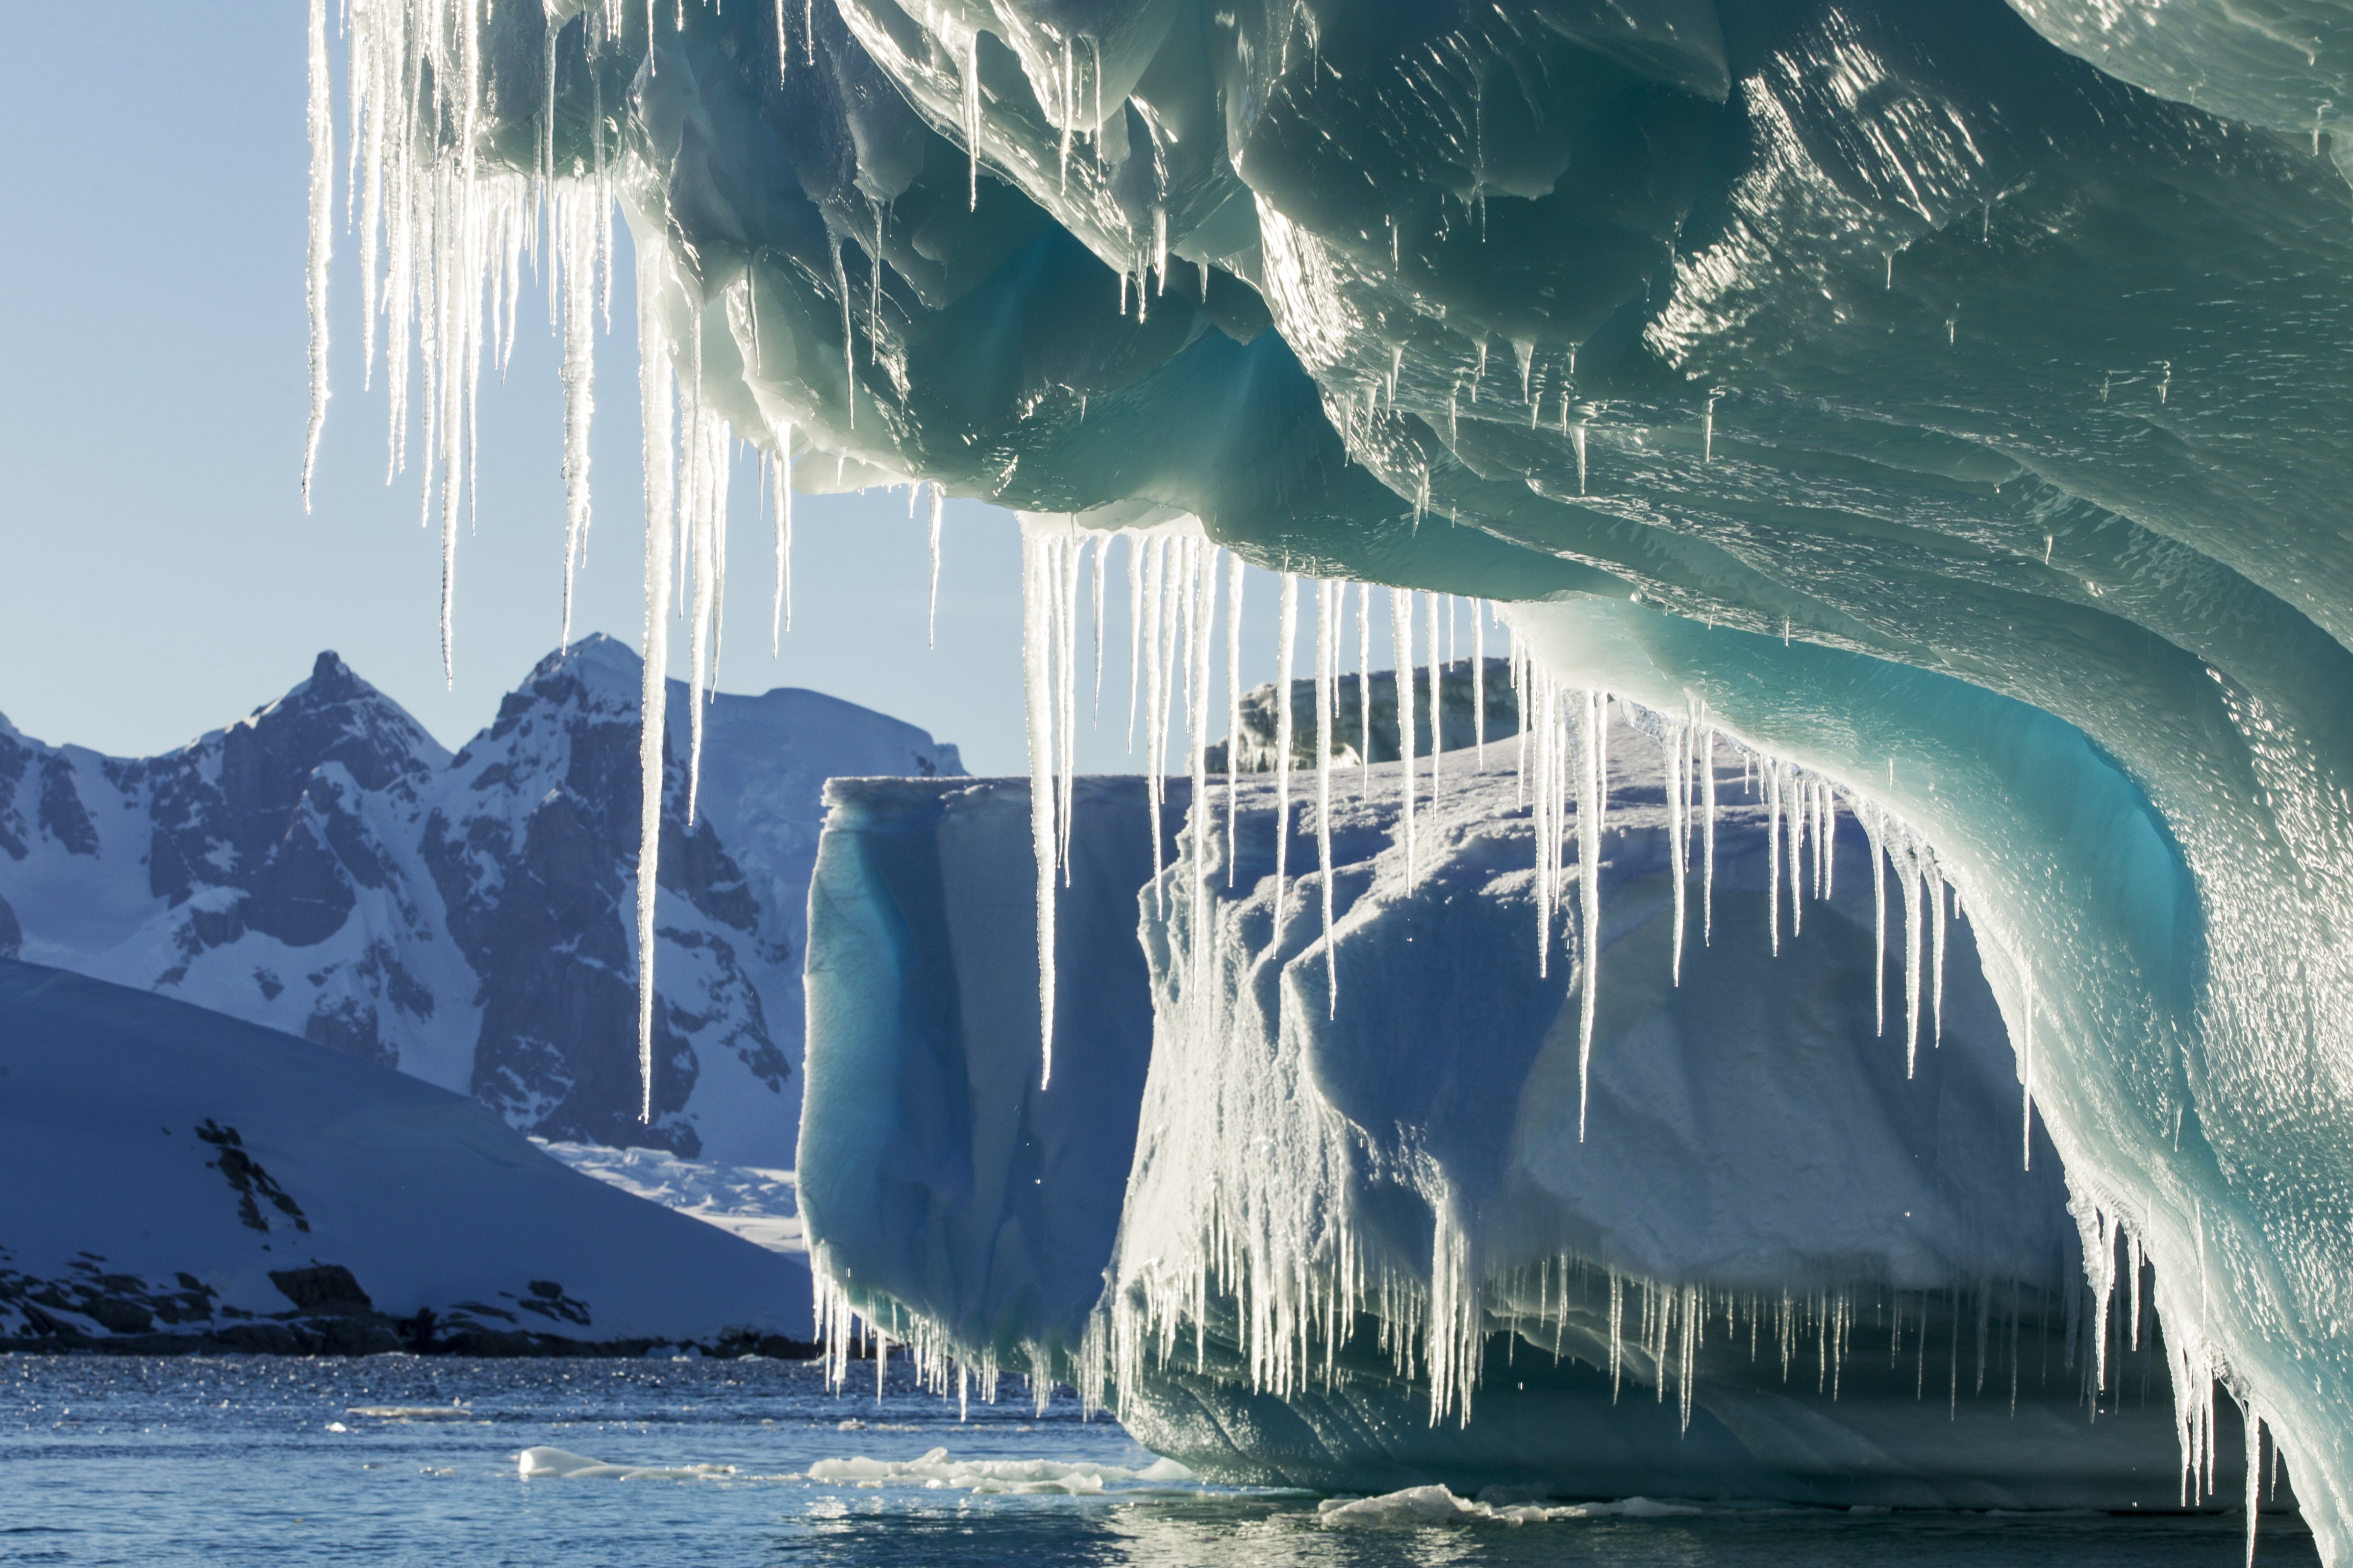 Iceberg, Lemaire Channel, Antarctica (Paul Souders—Getty Images)